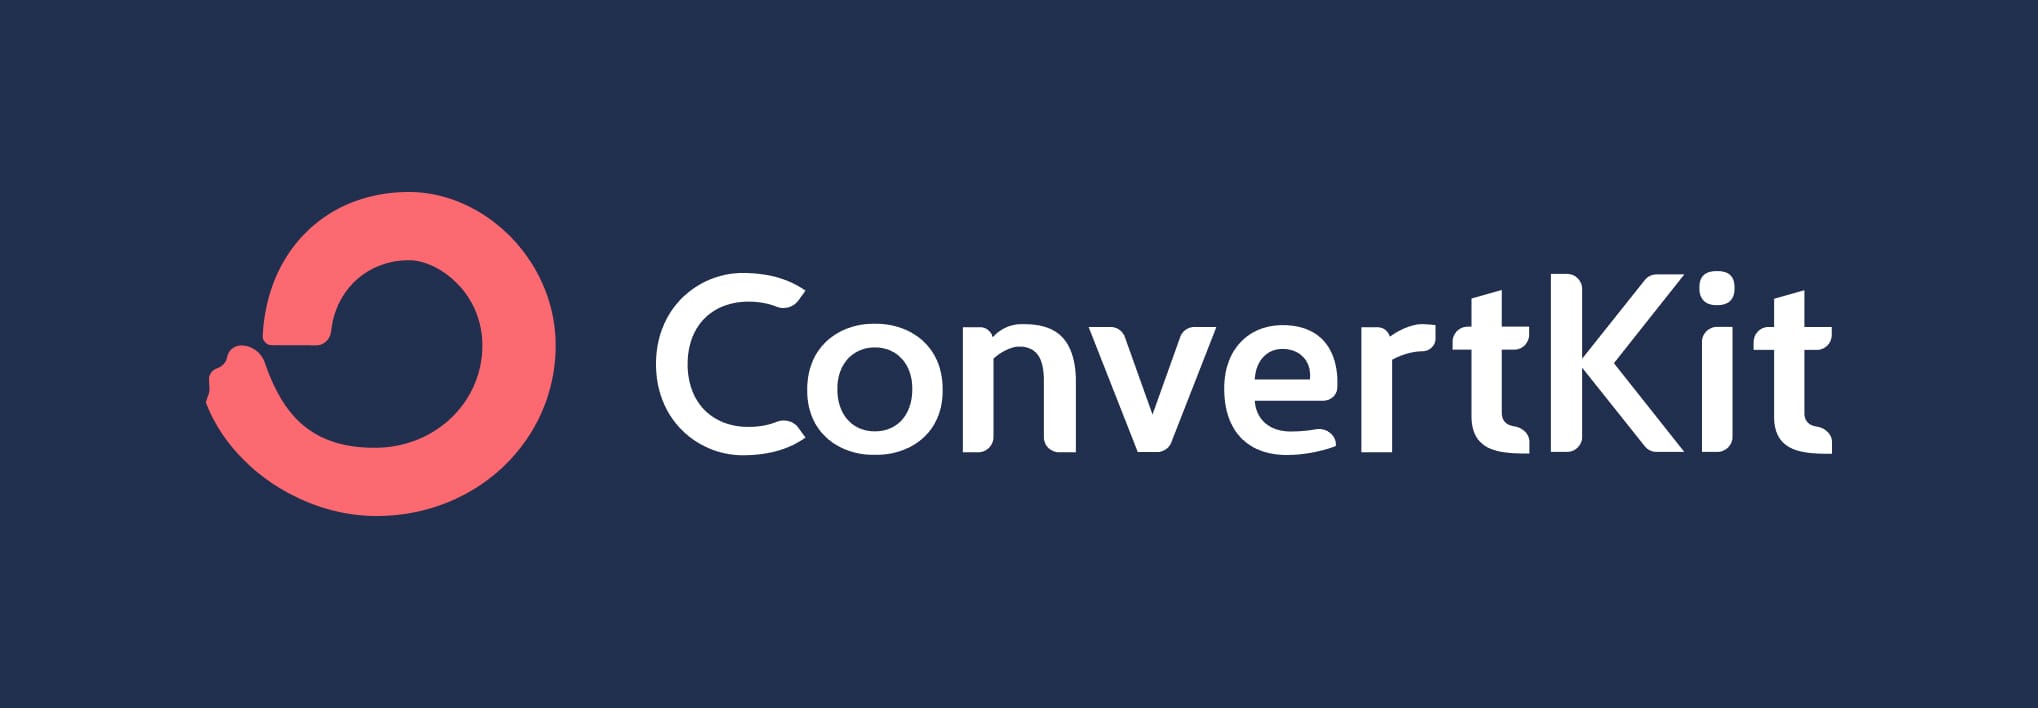 ConvertKit: 7 Reasons to Love This  Great Email Marketing Tool